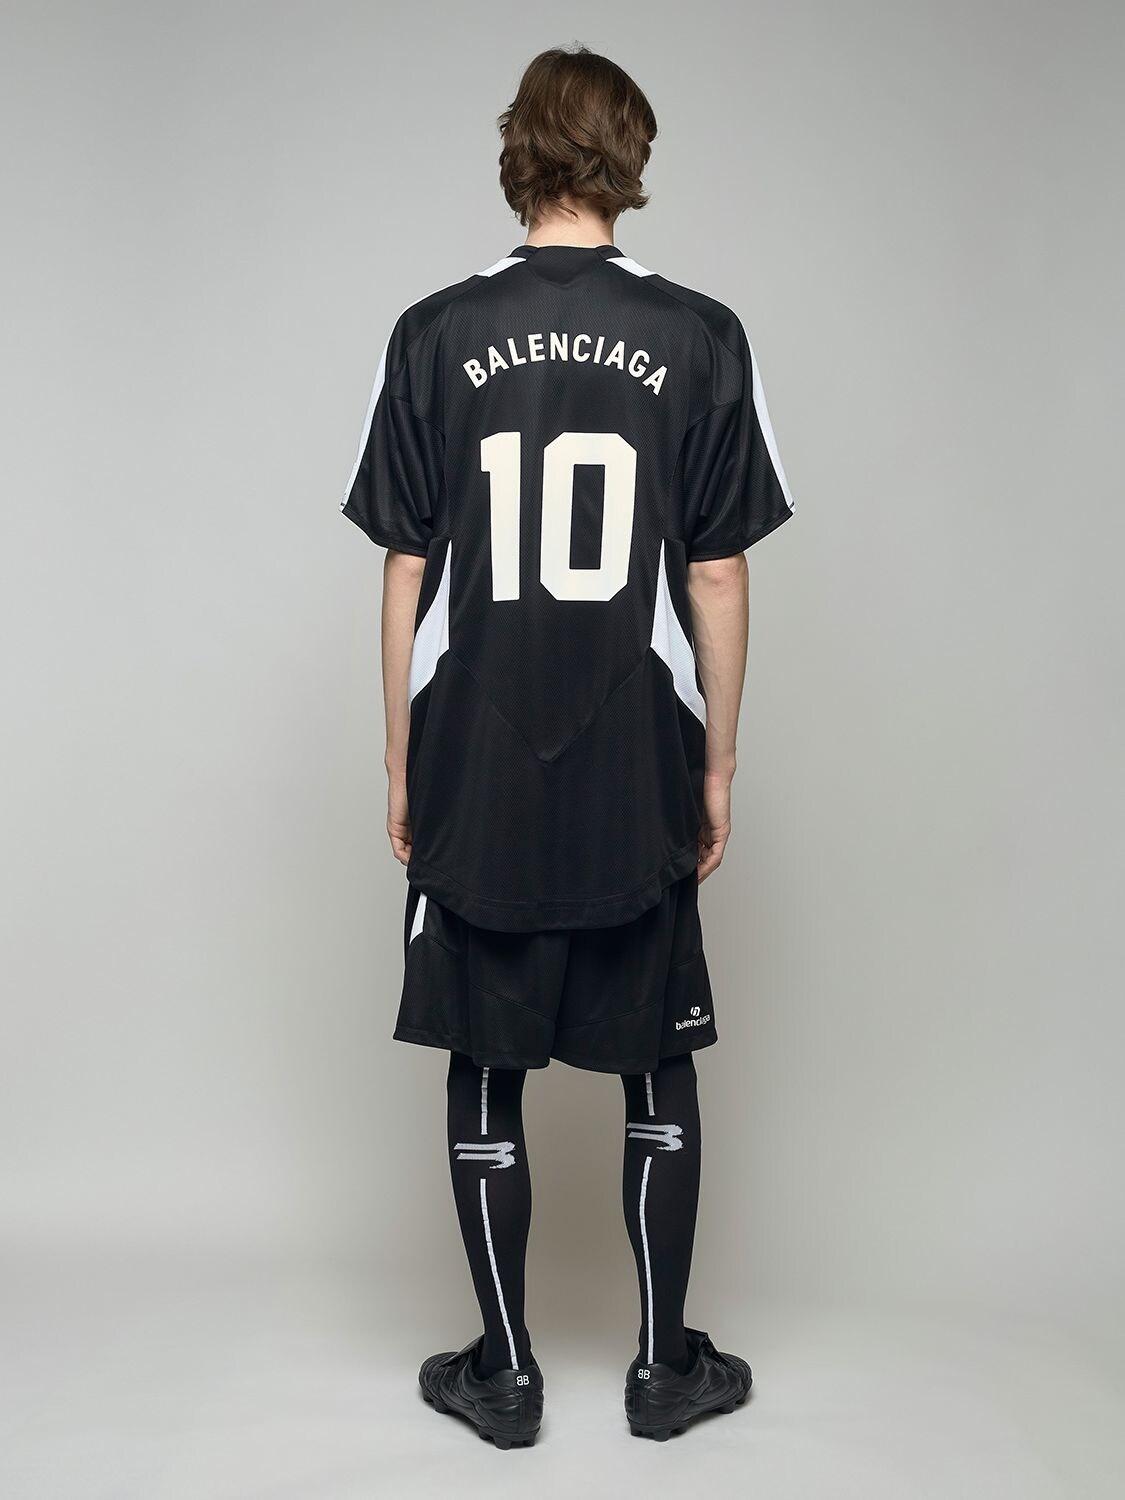 Balenciaga have released a highend fashionable football top for 780